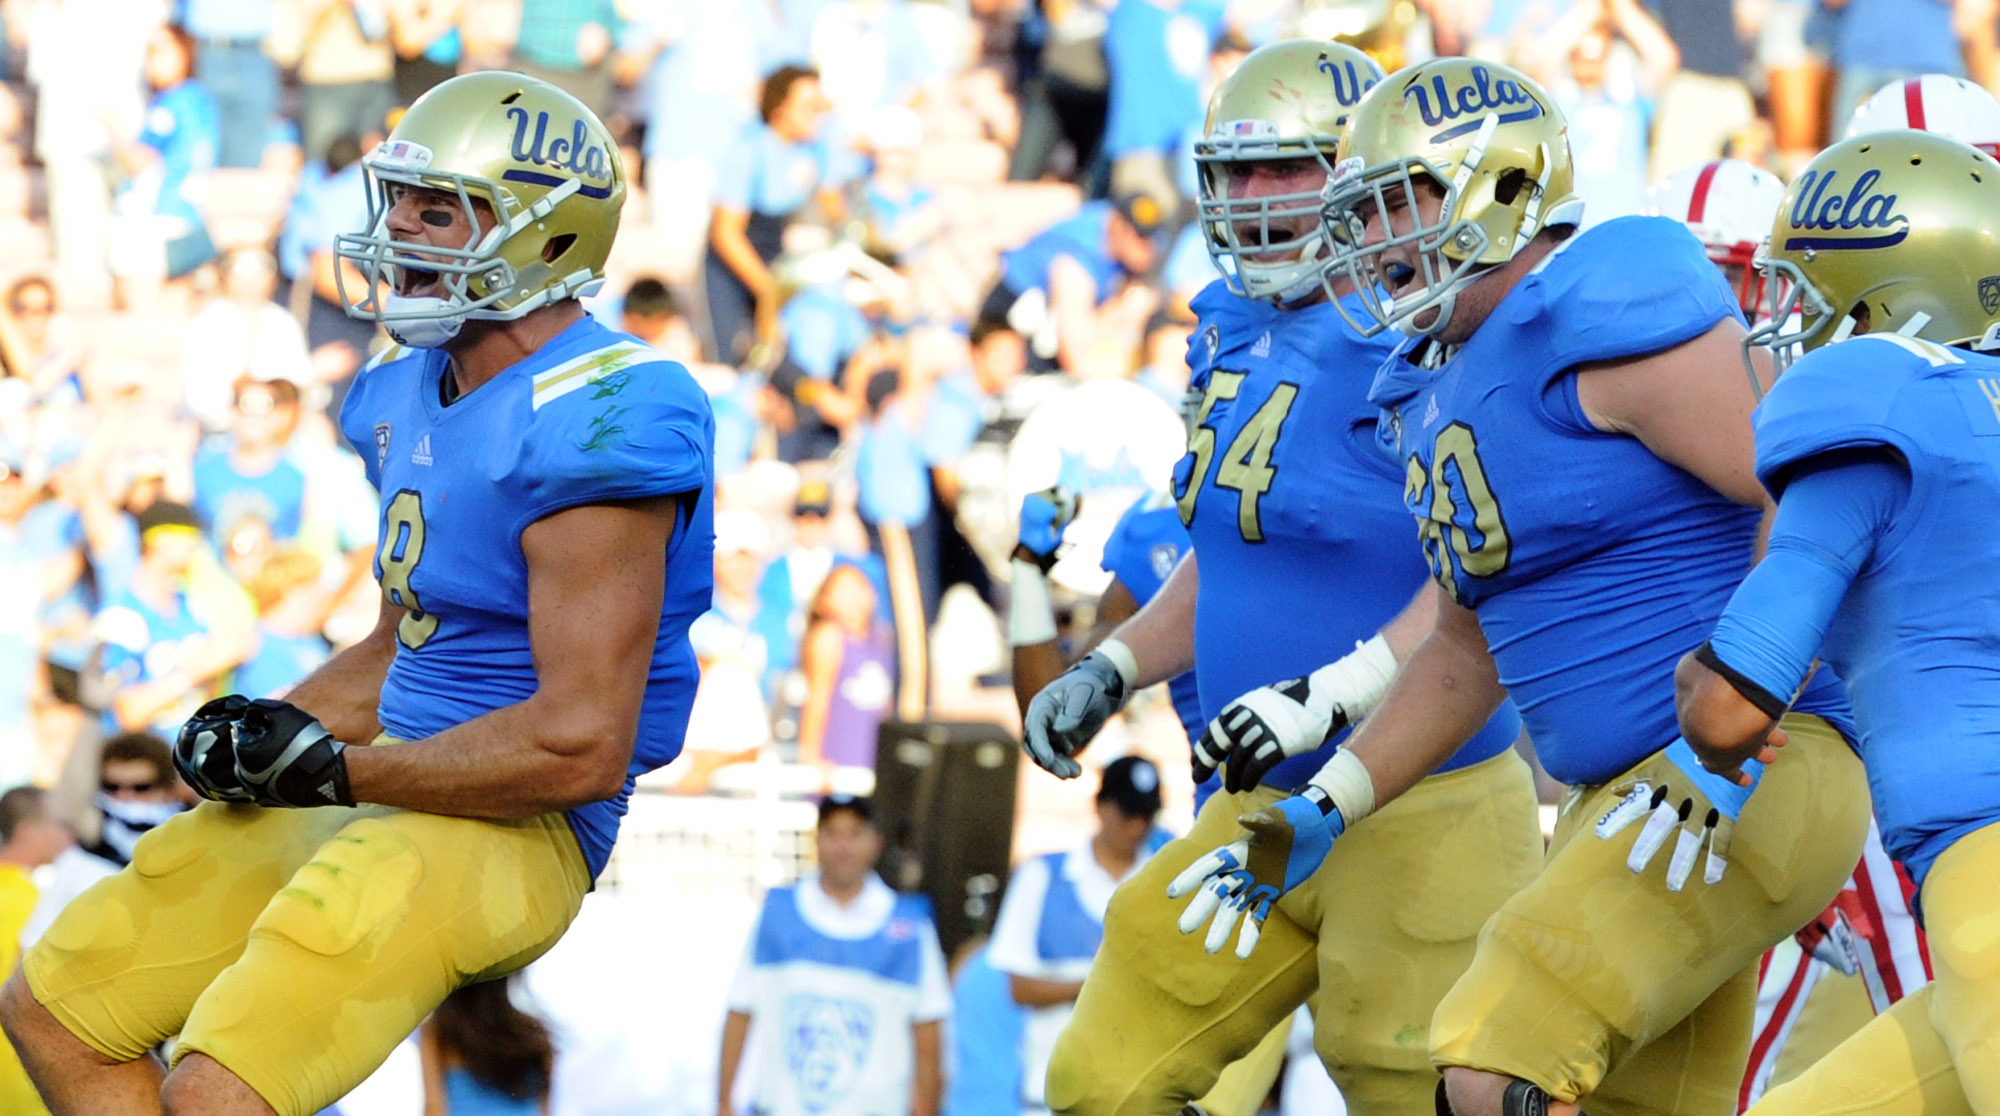 UCLA's 36-30 win over Nebraska in 2012 marked the first big victory of Jim Mora's tenure. Joe Fauria (left) is pictured celebrating one of his two touchdown catches. (Keith Birmingham/Staff)